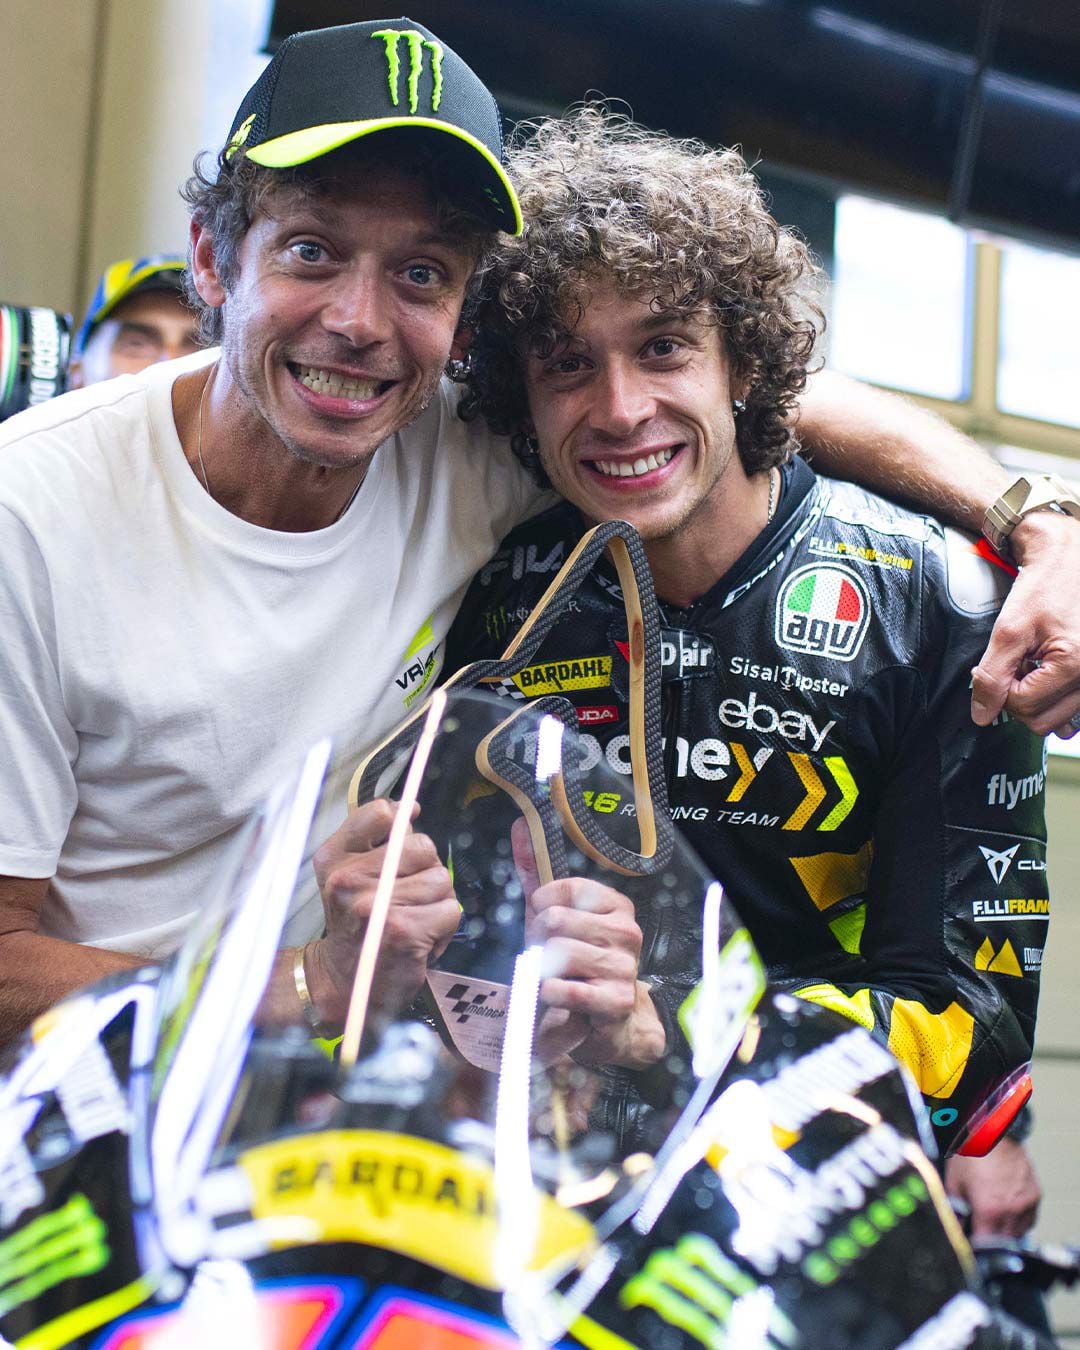 As with most VR46 Academy riders, Rossi is the inspiration, goal, and mentor.